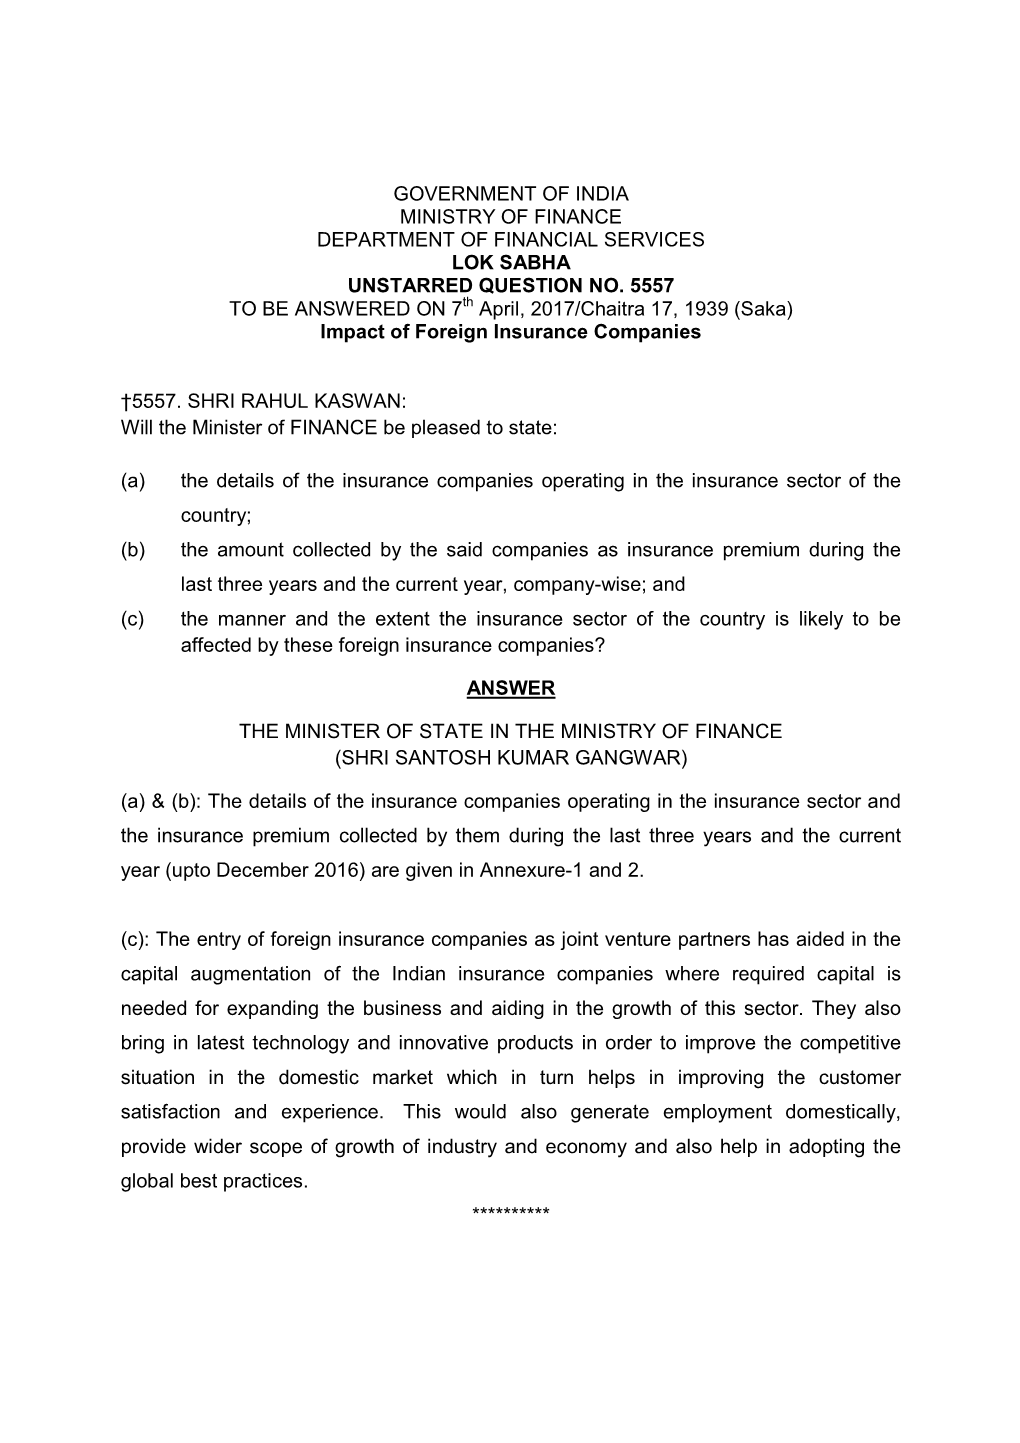 Government of India Ministry of Finance Department of Financial Services Lok Sabha Unstarred Question No